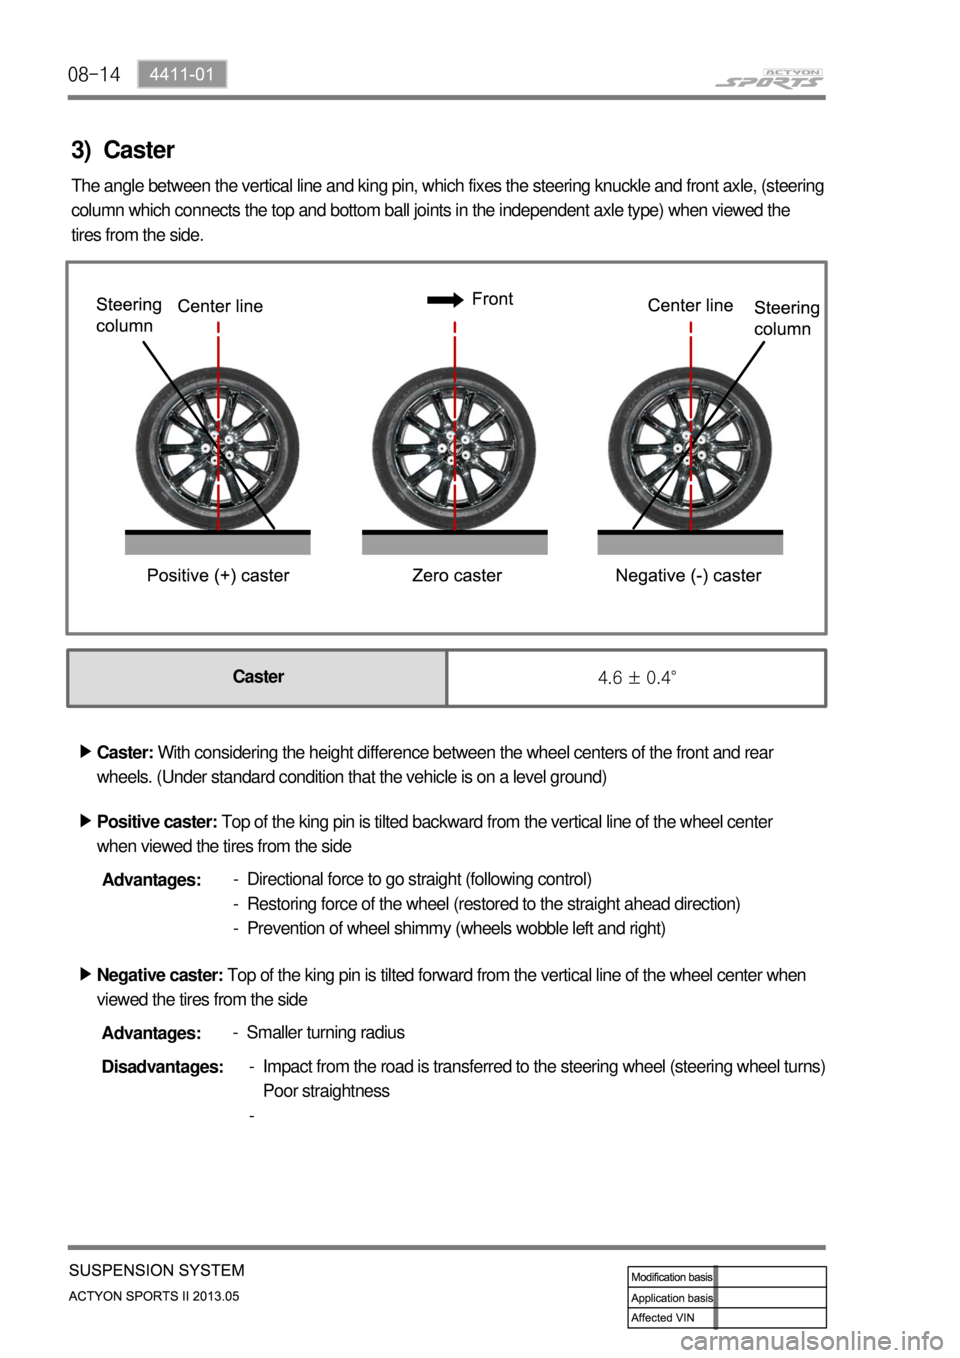 SSANGYONG NEW ACTYON SPORTS 2013  Service Manual 08-14
3)  Caster
The angle between the vertical line and king pin, which fixes the steering knuckle and front axle, (steering 
column which connects the top and bottom ball joints in the independent a